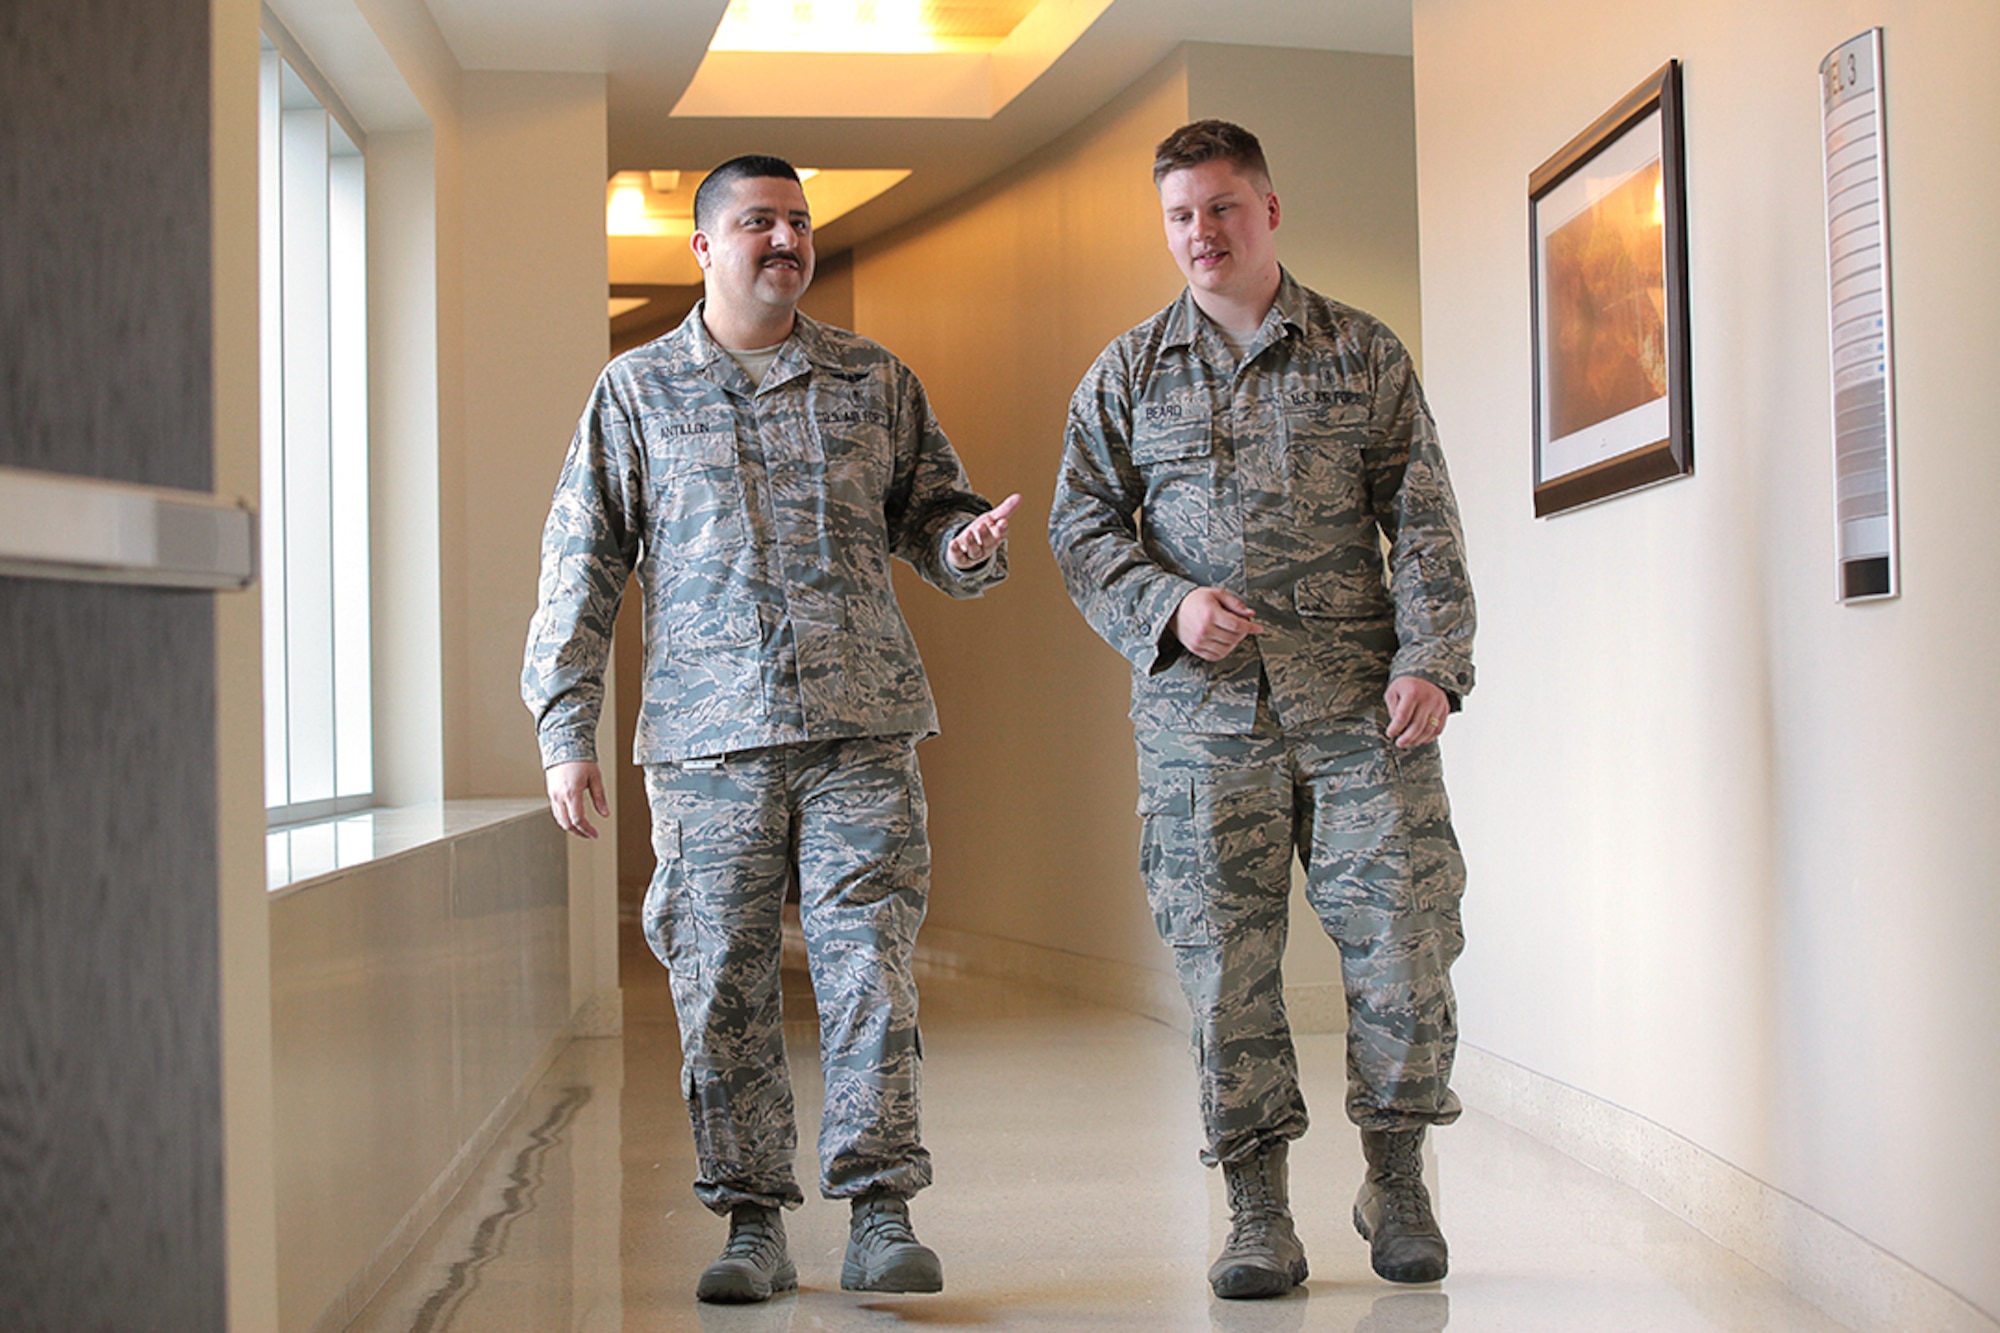 U.S. Air Force Senior Master Sgt. Jesus Antillon and Staff Sgt. Joseph Beard, medical technicians with the 11th Medical Group at Joint Base Andrews, Md., discuss patient care, April 5, 2018. (Defense Health Agency photo by Jamie Chirinos)